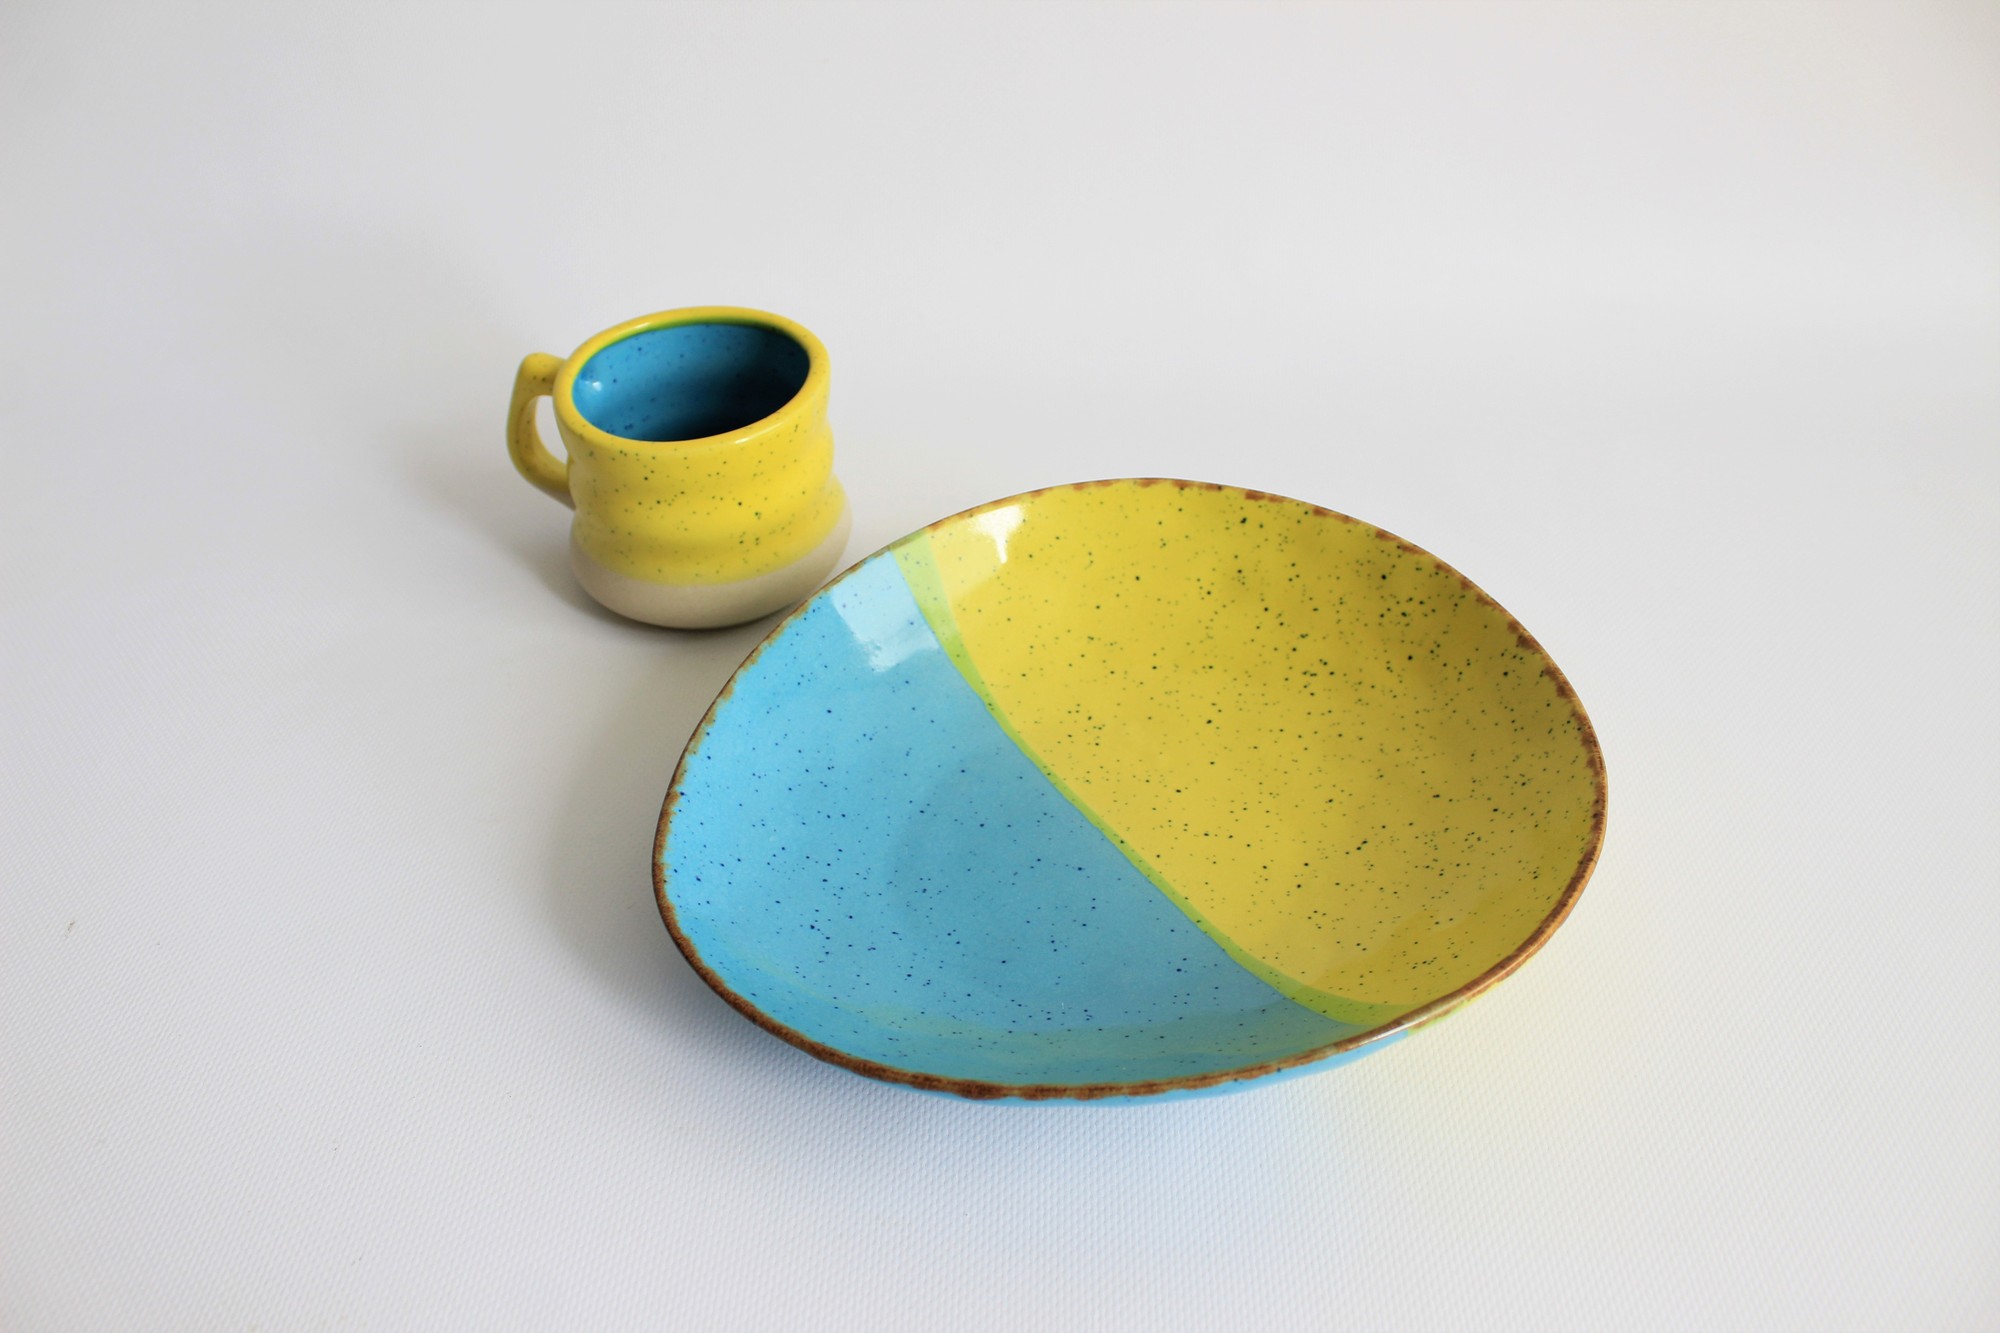 dinnerware sets ceramic, plate and bowl handmade, blue and yellow small salad bowl